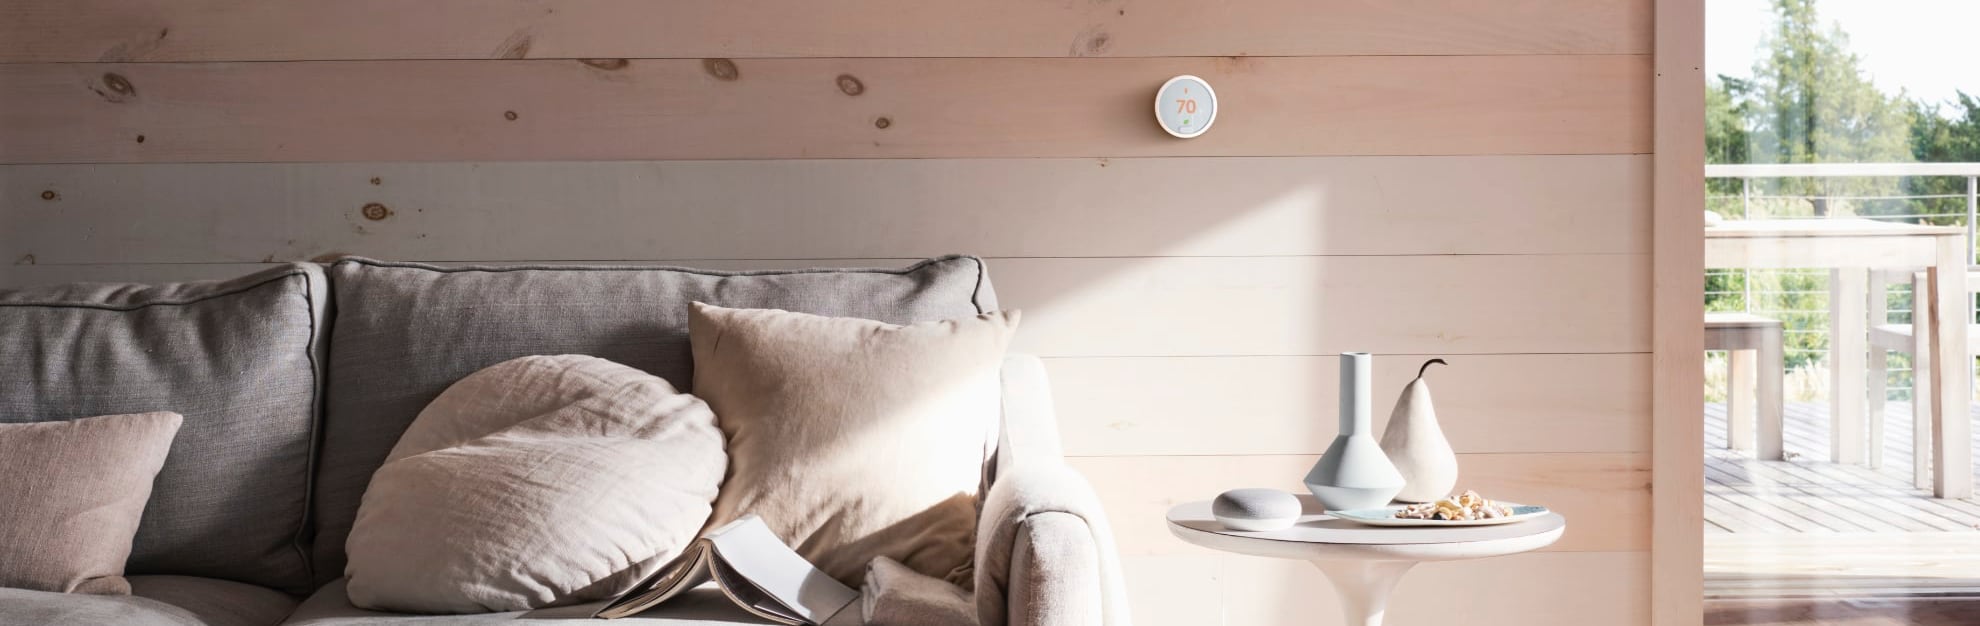 Vivint Home Automation in Lawrence